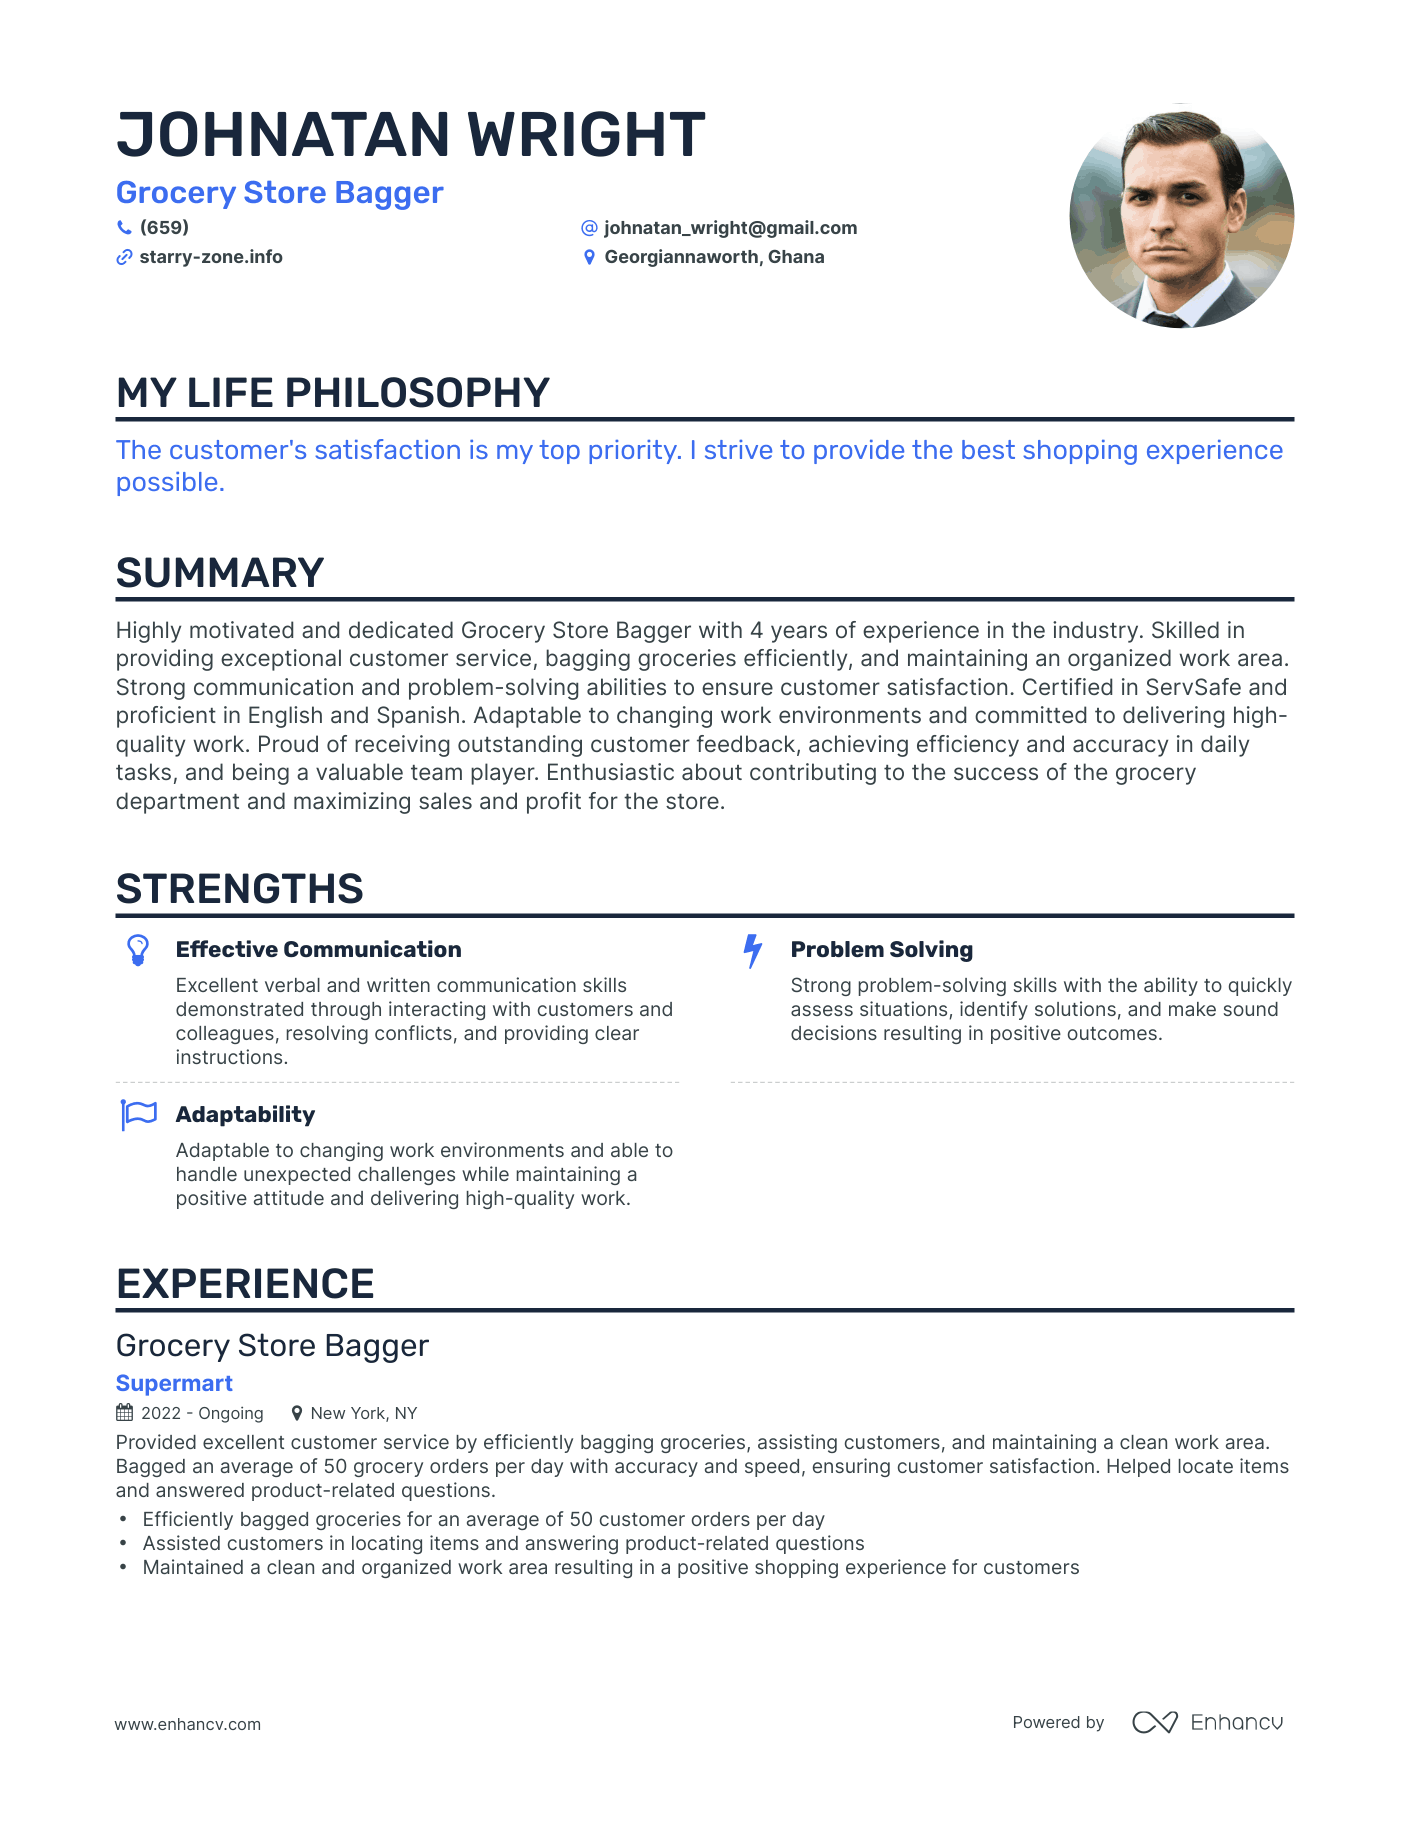 Creative Grocery Store Bagger Resume Example